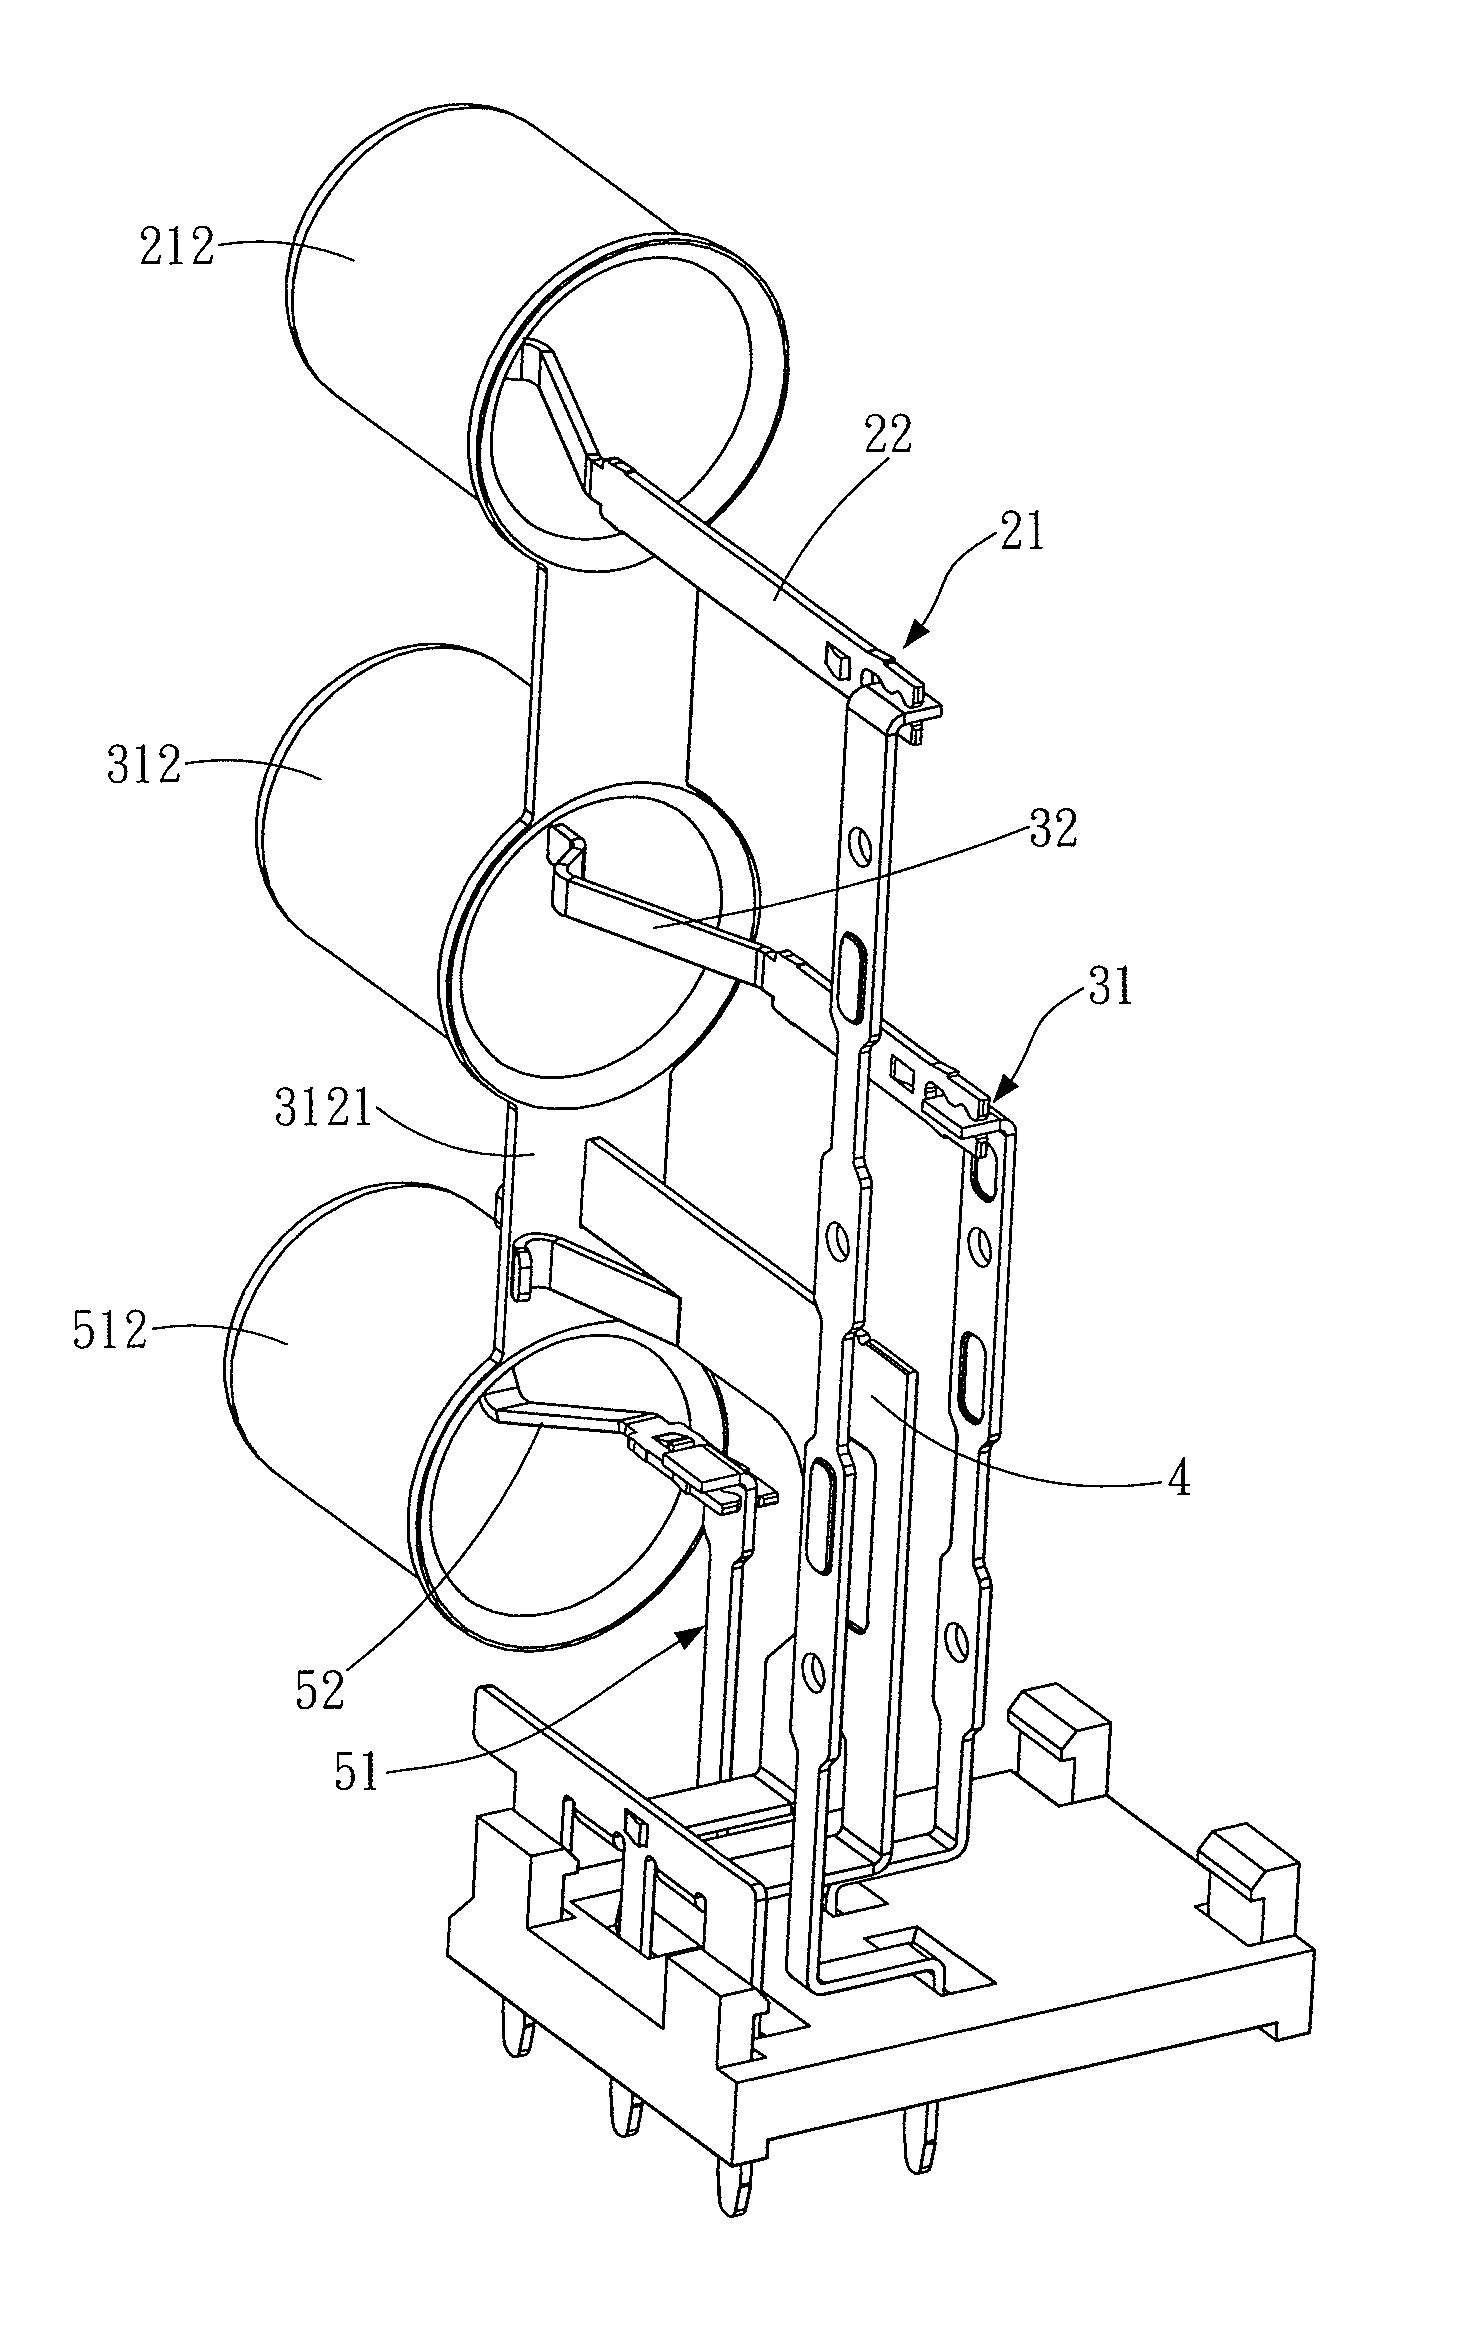 Electrical connector for reducing high frequency crosstalk interferences